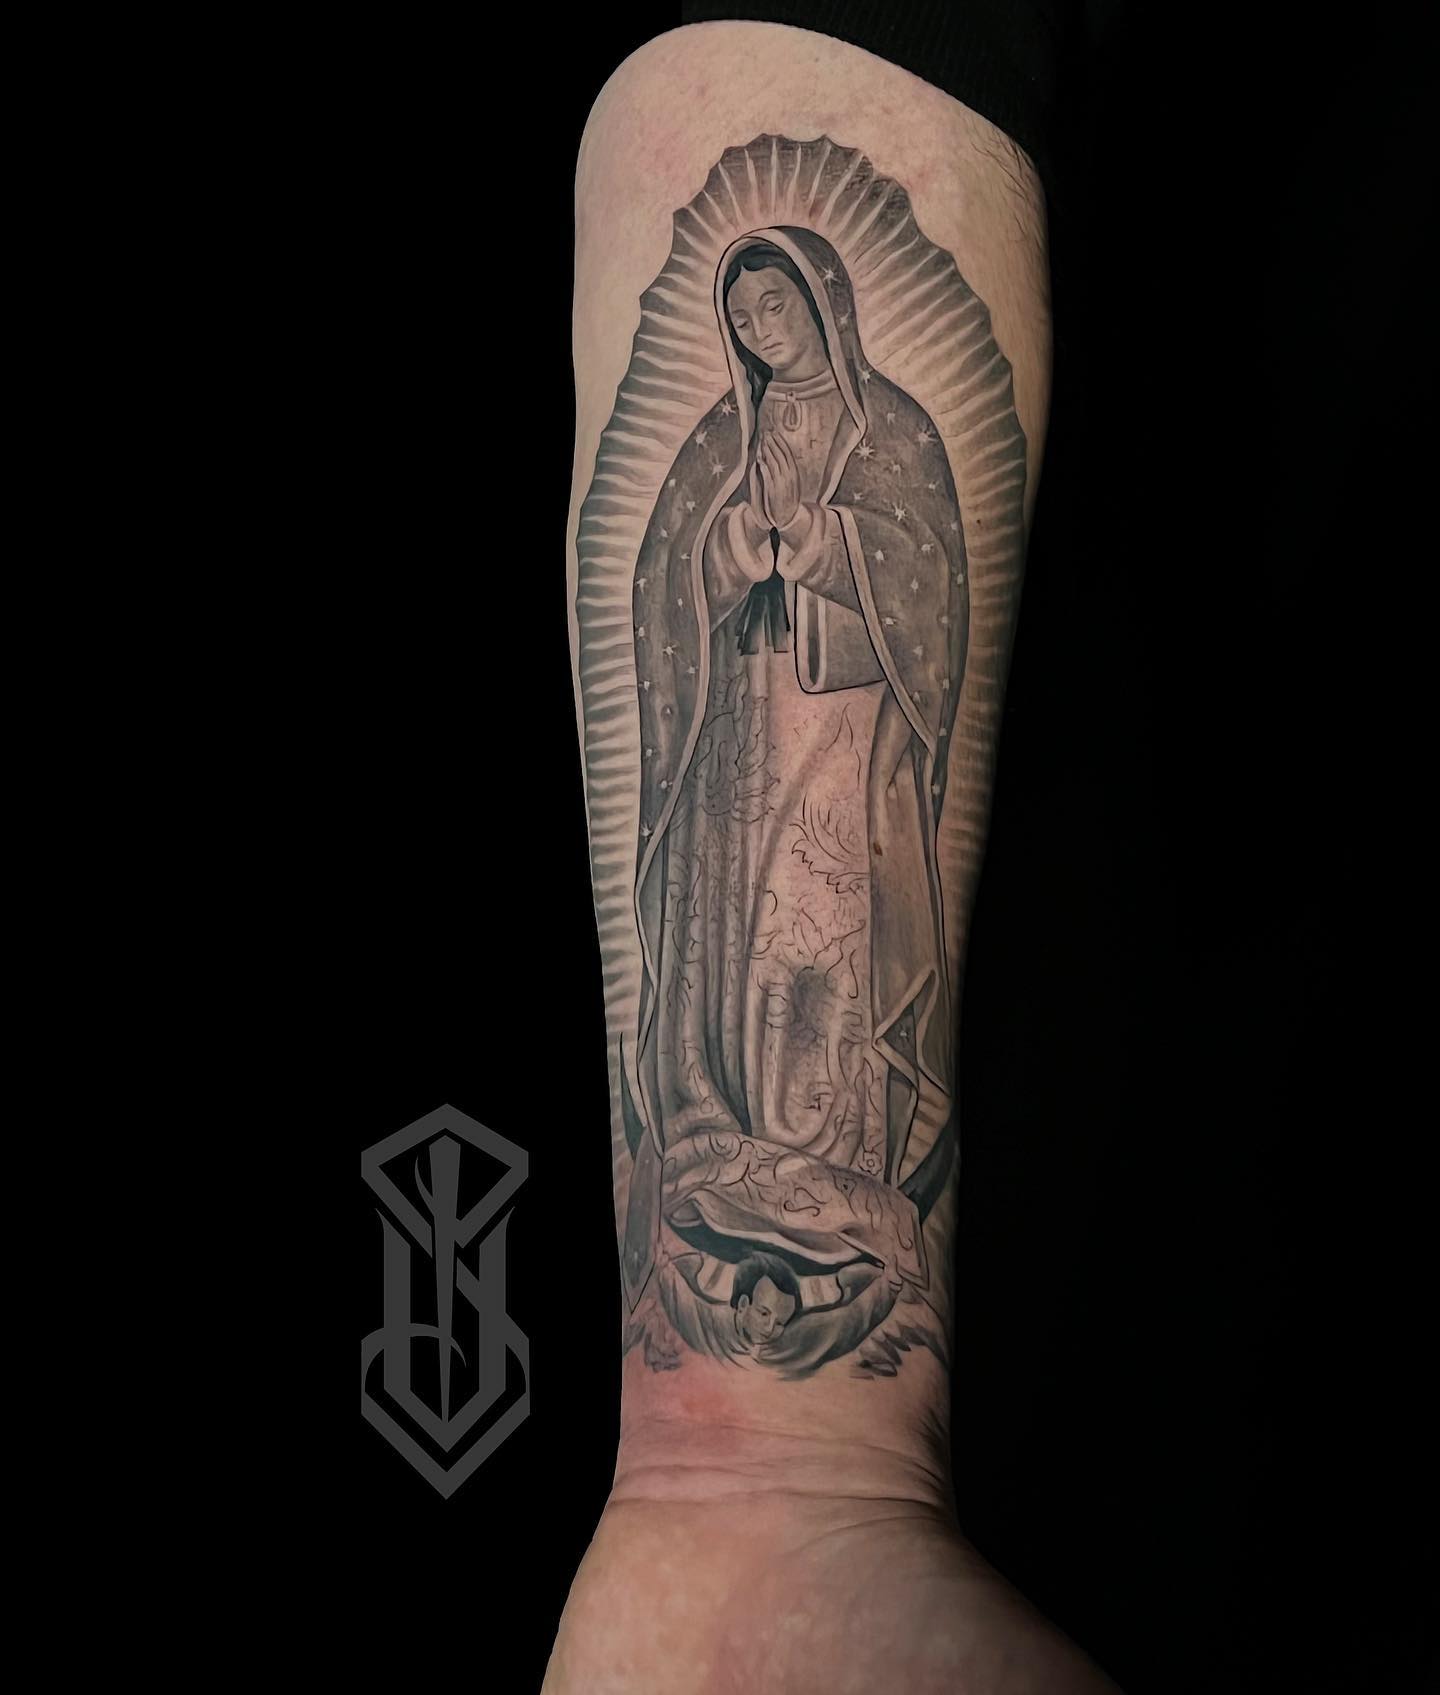 Our lady of Guadalupe and snake friend tattoo tattoos neworleans  downtowntattoosnola  Hand tattoos Mary tattoo Sleeve tattoos